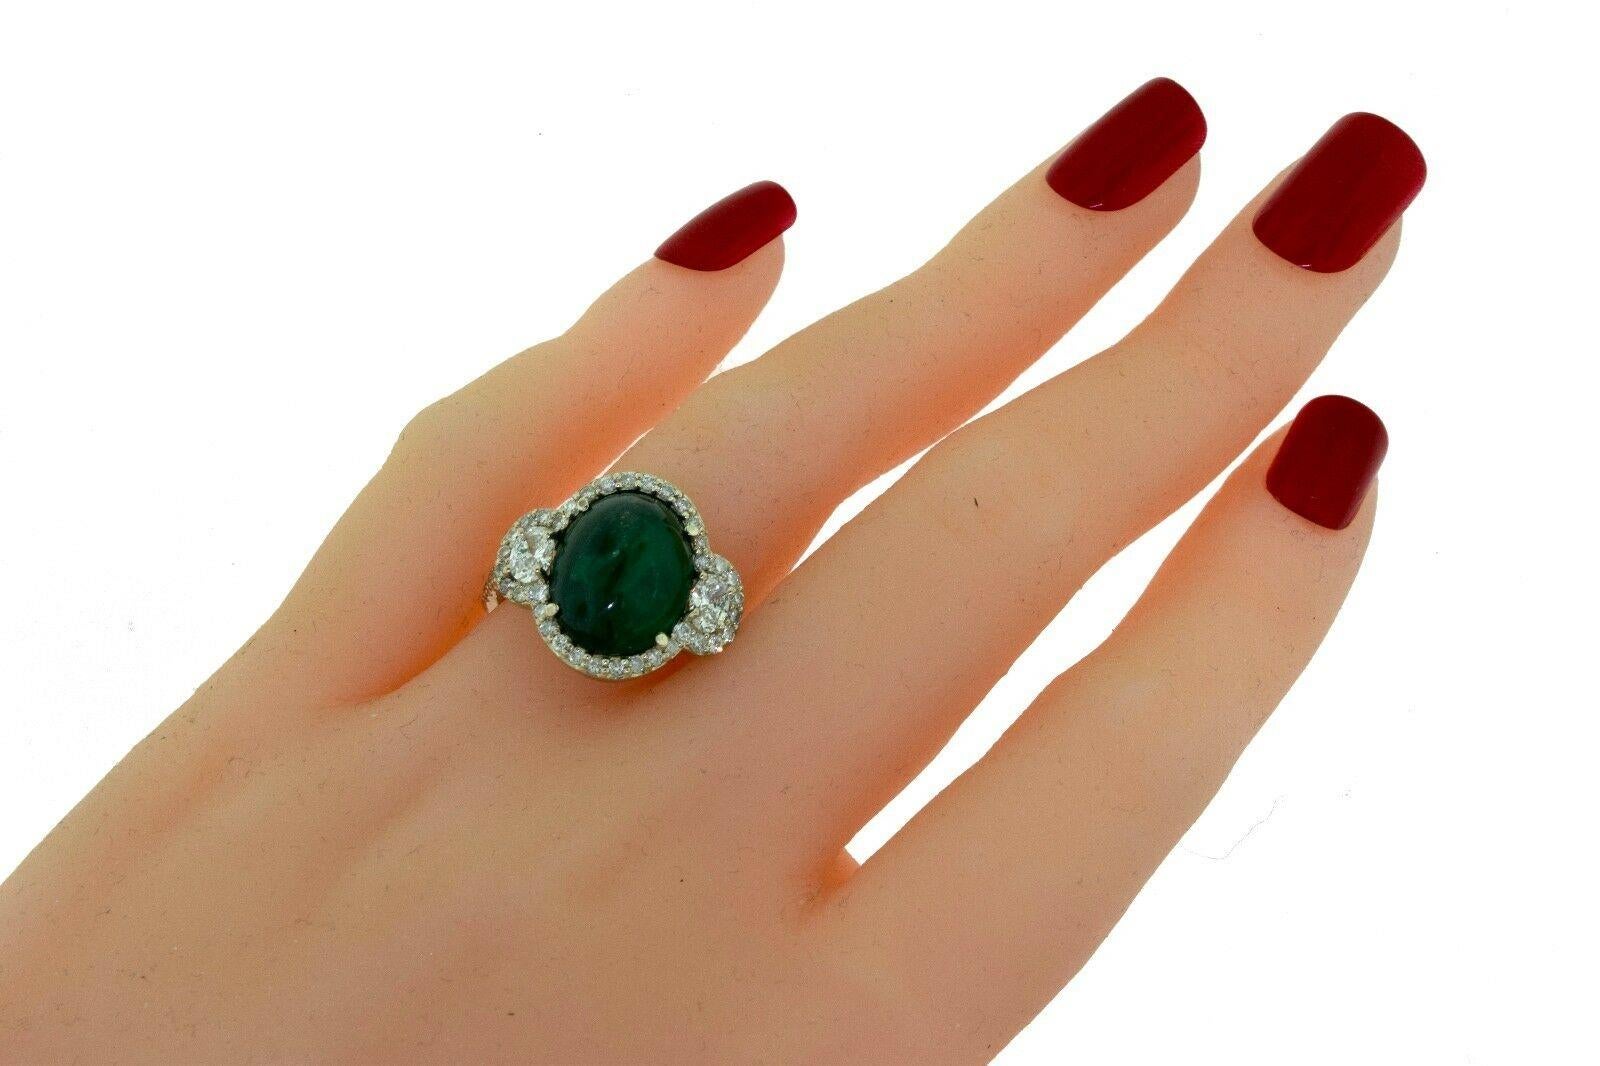 Brilliance Jewels, Miami
Questions? Call Us Anytime!
786,482,8100

Metal: White Gold

Metal Purity: 18k

​​​​​​​Stones: Colombian Emerald

                  Round Brilliant Diamonds

​​​​​​​Diamond Color: G - H

​​​​​​​Diamond Clarity: